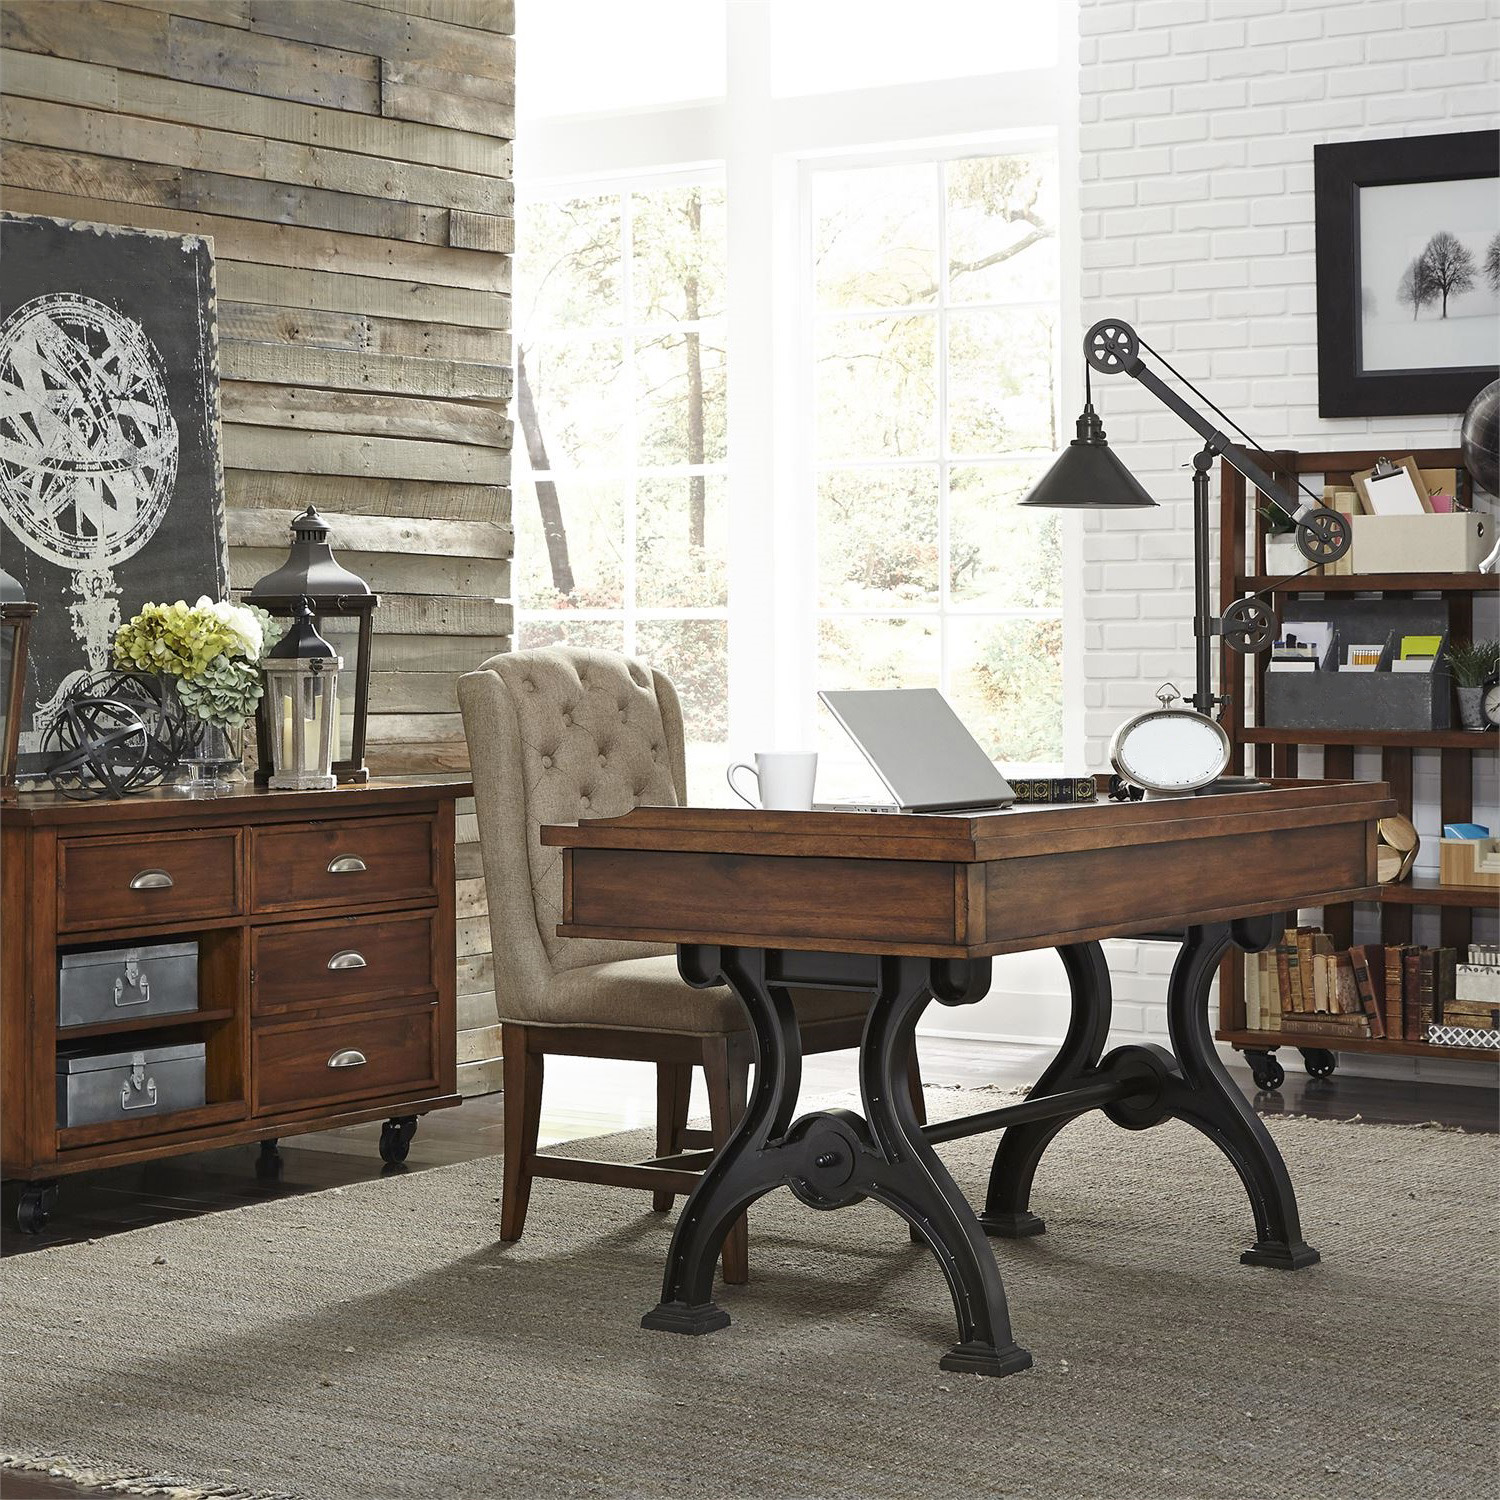 American design furniture by Monroe Tredegar Home Office Collection